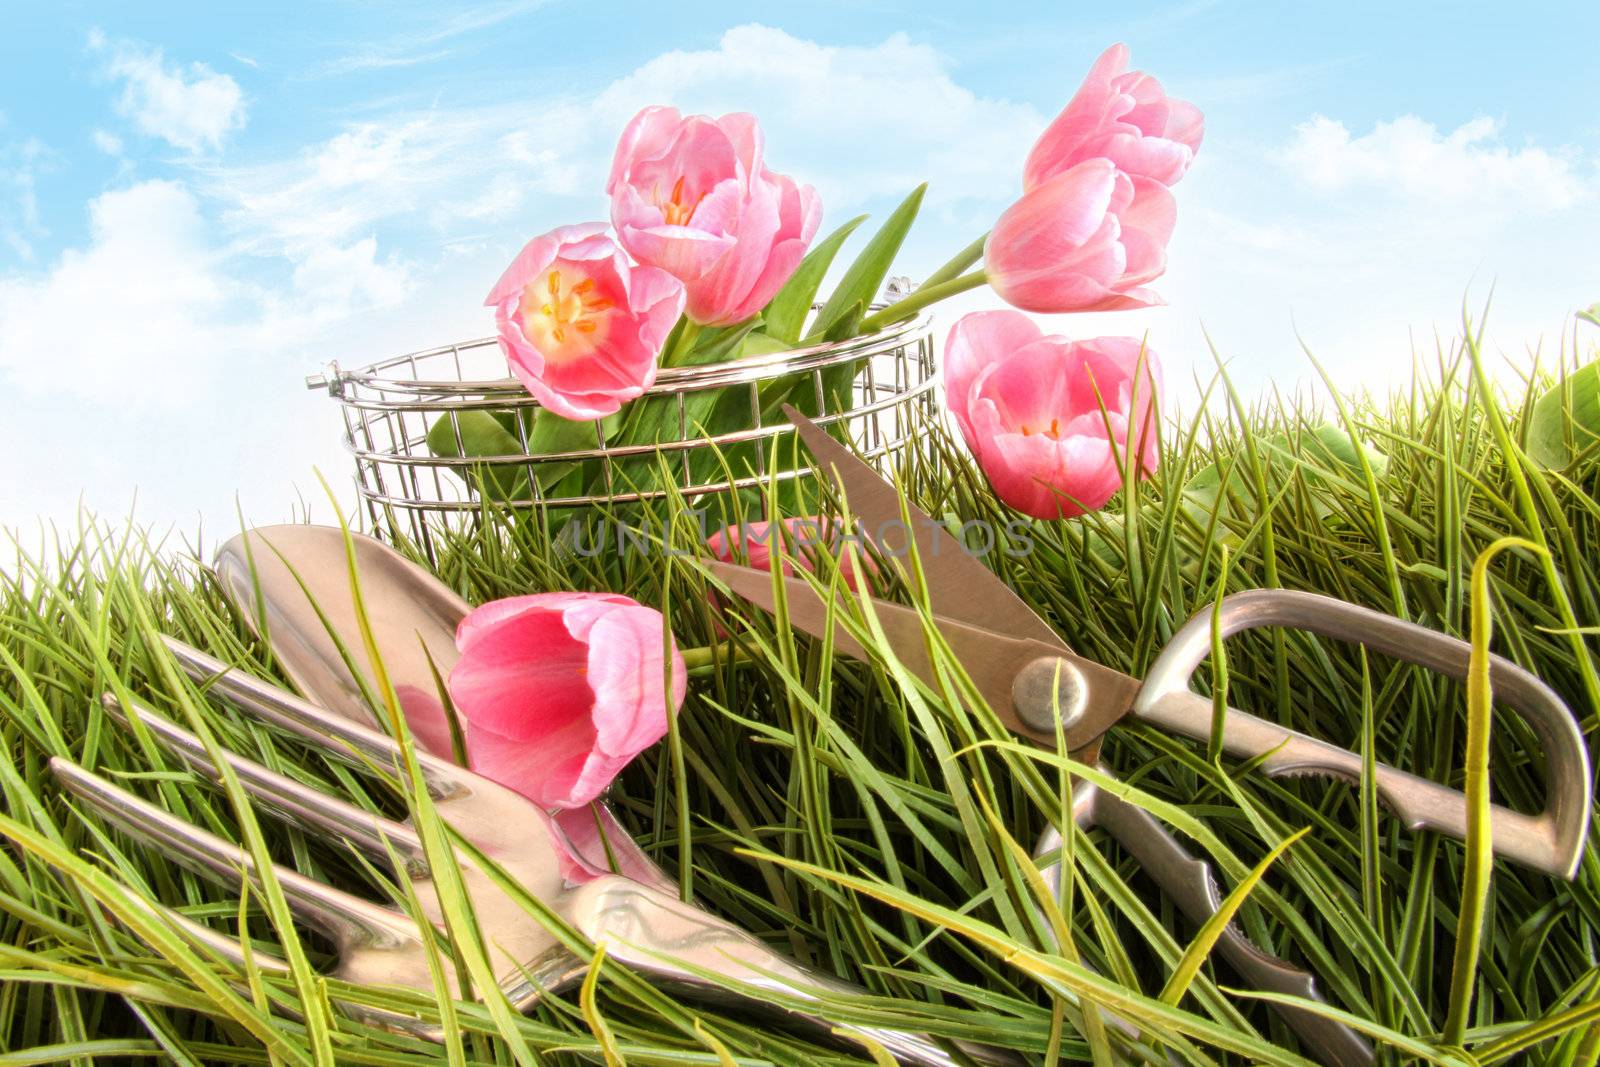 Pink tulips in tall grass  by Sandralise